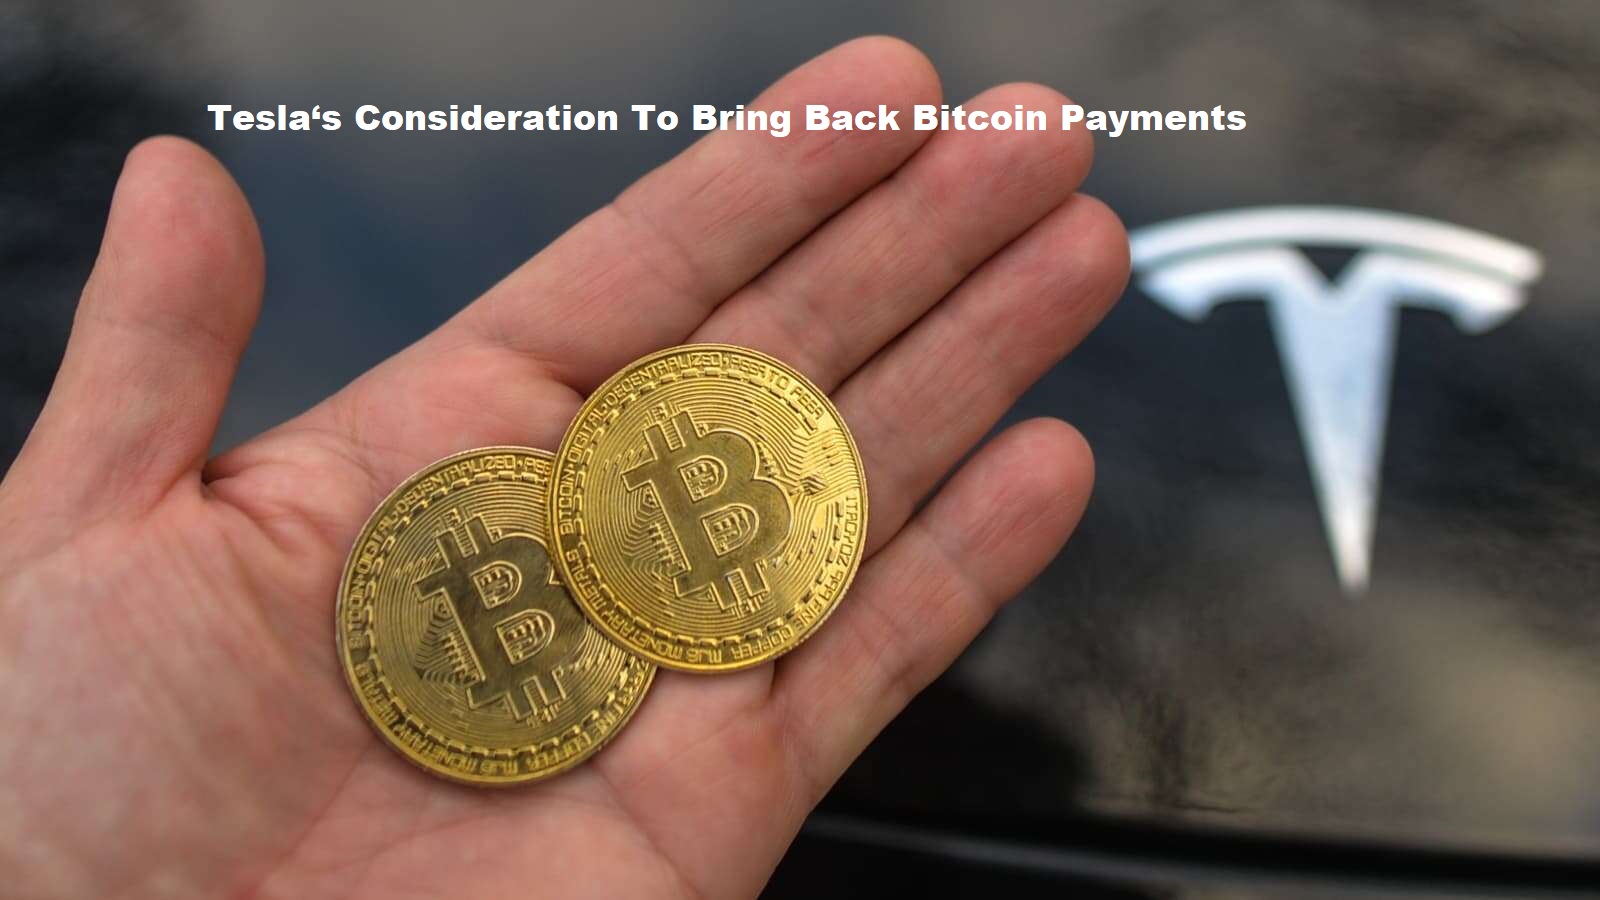 Tesla‘s Consideration To Bring Back Bitcoin Payments